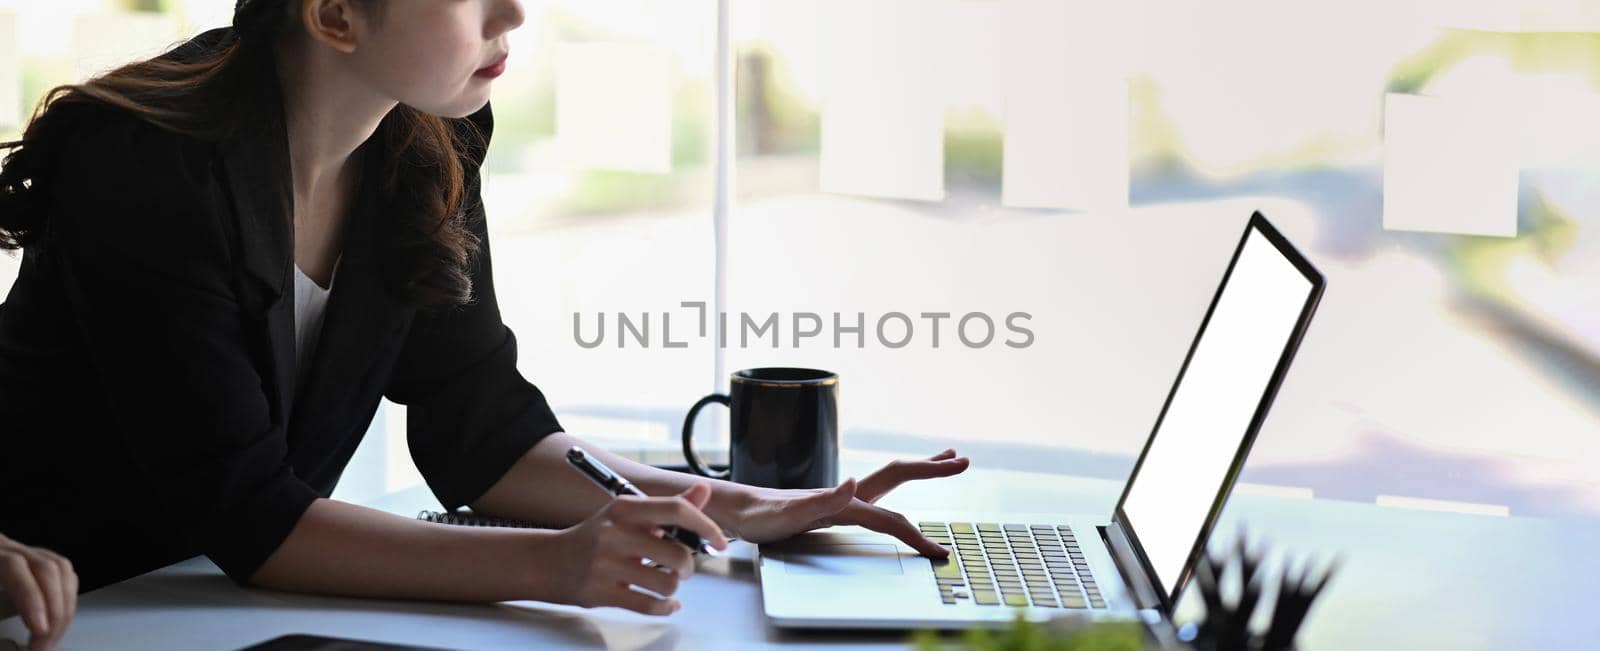 Businesswoman searching information with laptop computer at office desk.